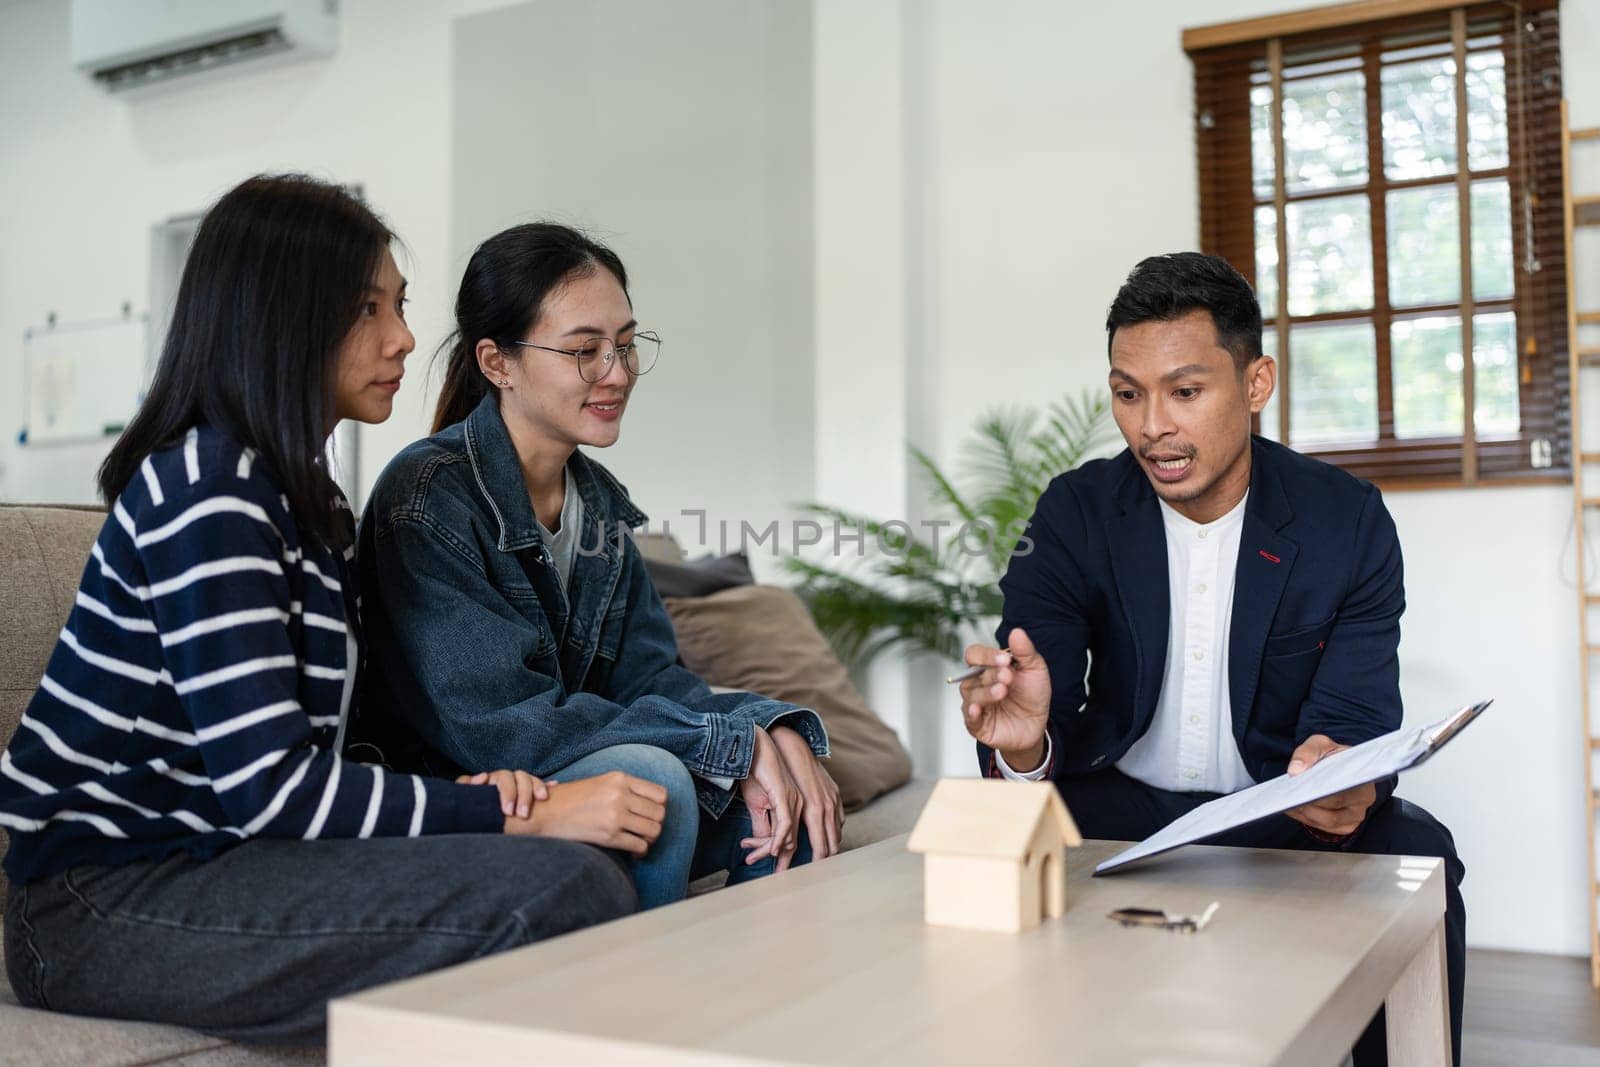 young lesbian married couple discussing agreement with skilled real estate agent or broker. Professional financial advisor or saleswoman explaining contract detail by itchaznong